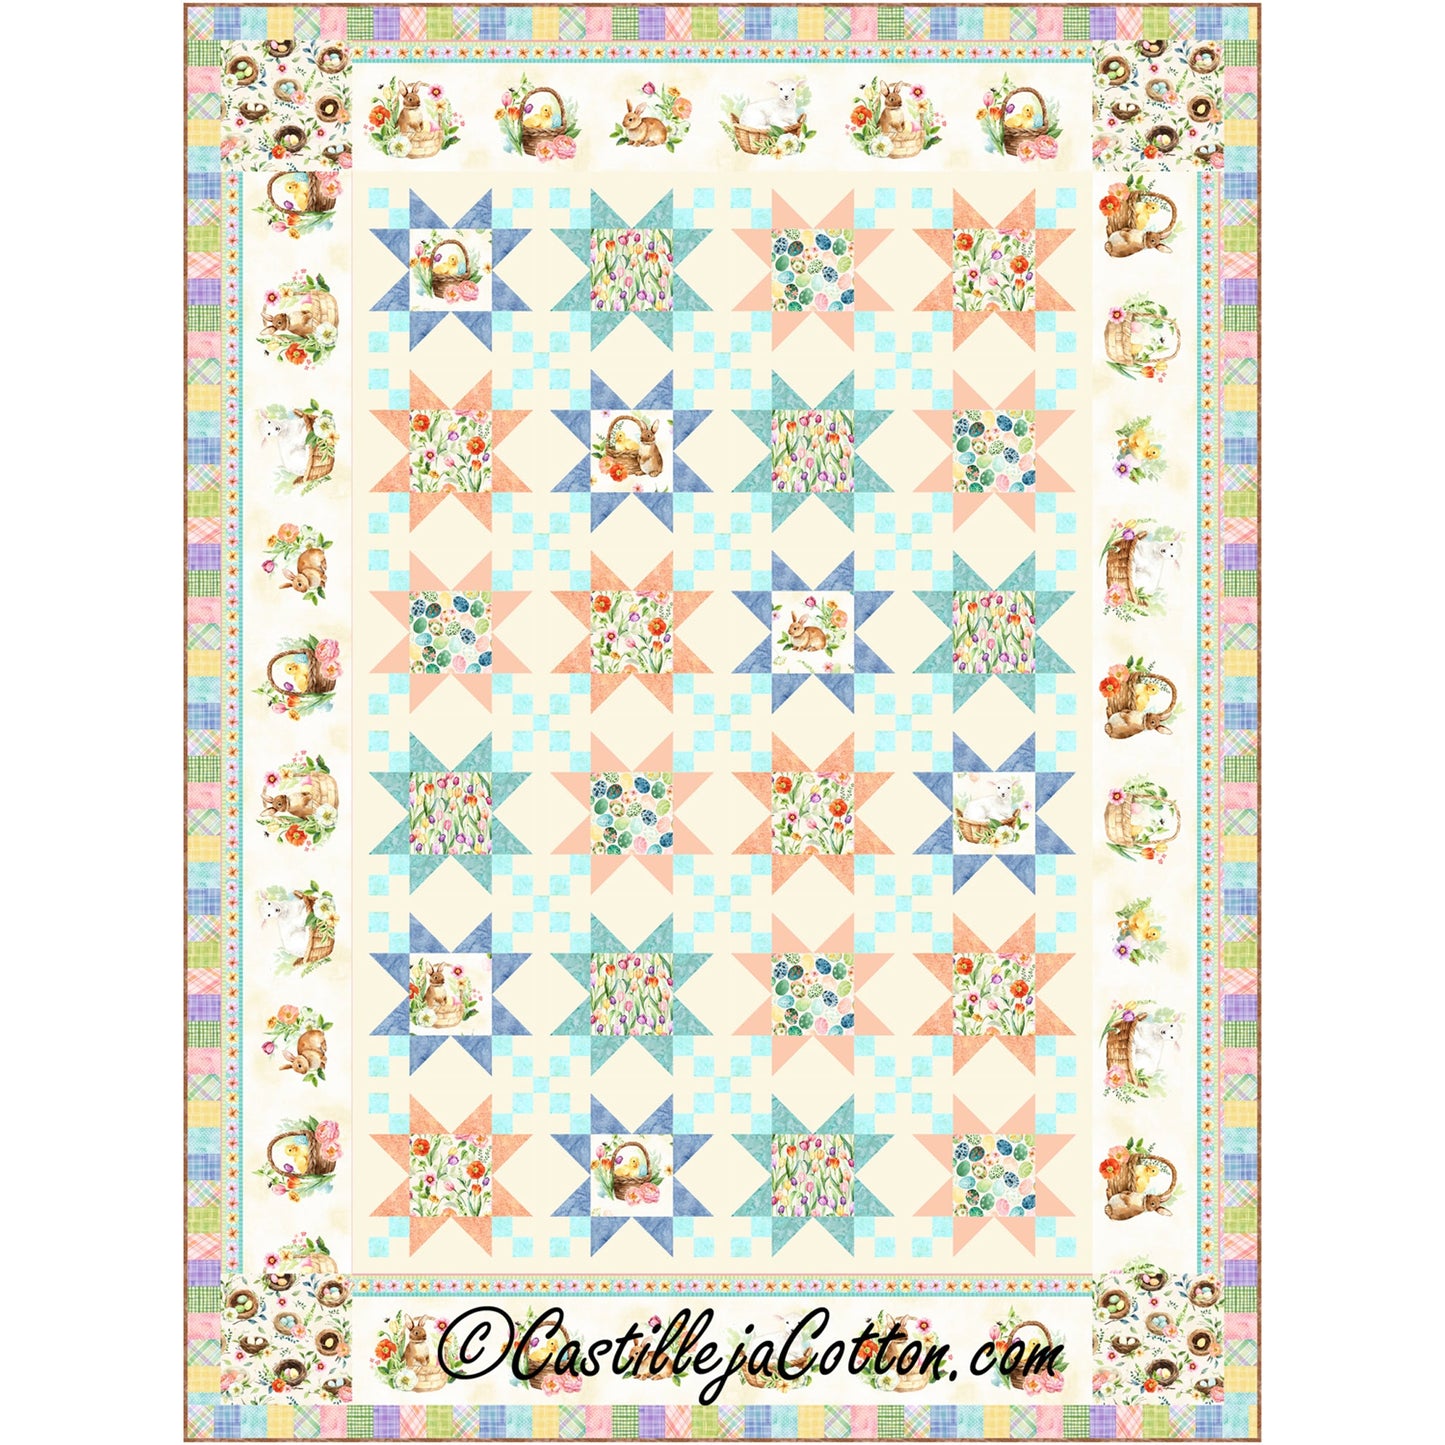 Star quilt pattern using Easter and spring fabric and border of additional Easter and spring fabric. In lovely pastels.